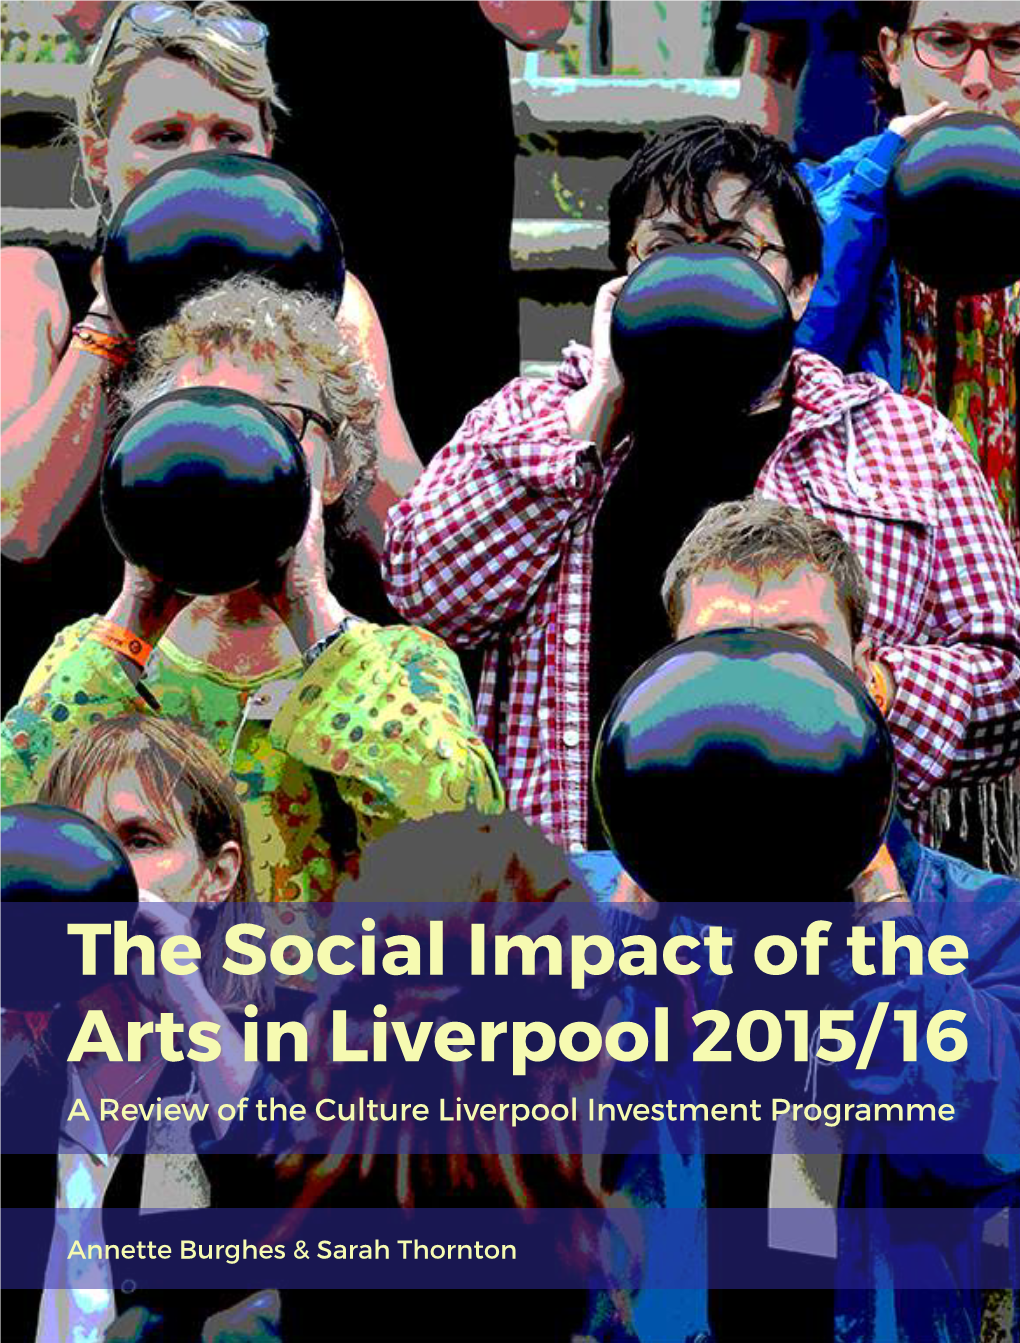 The Social Impact of the Arts in Liverpool 2015/16